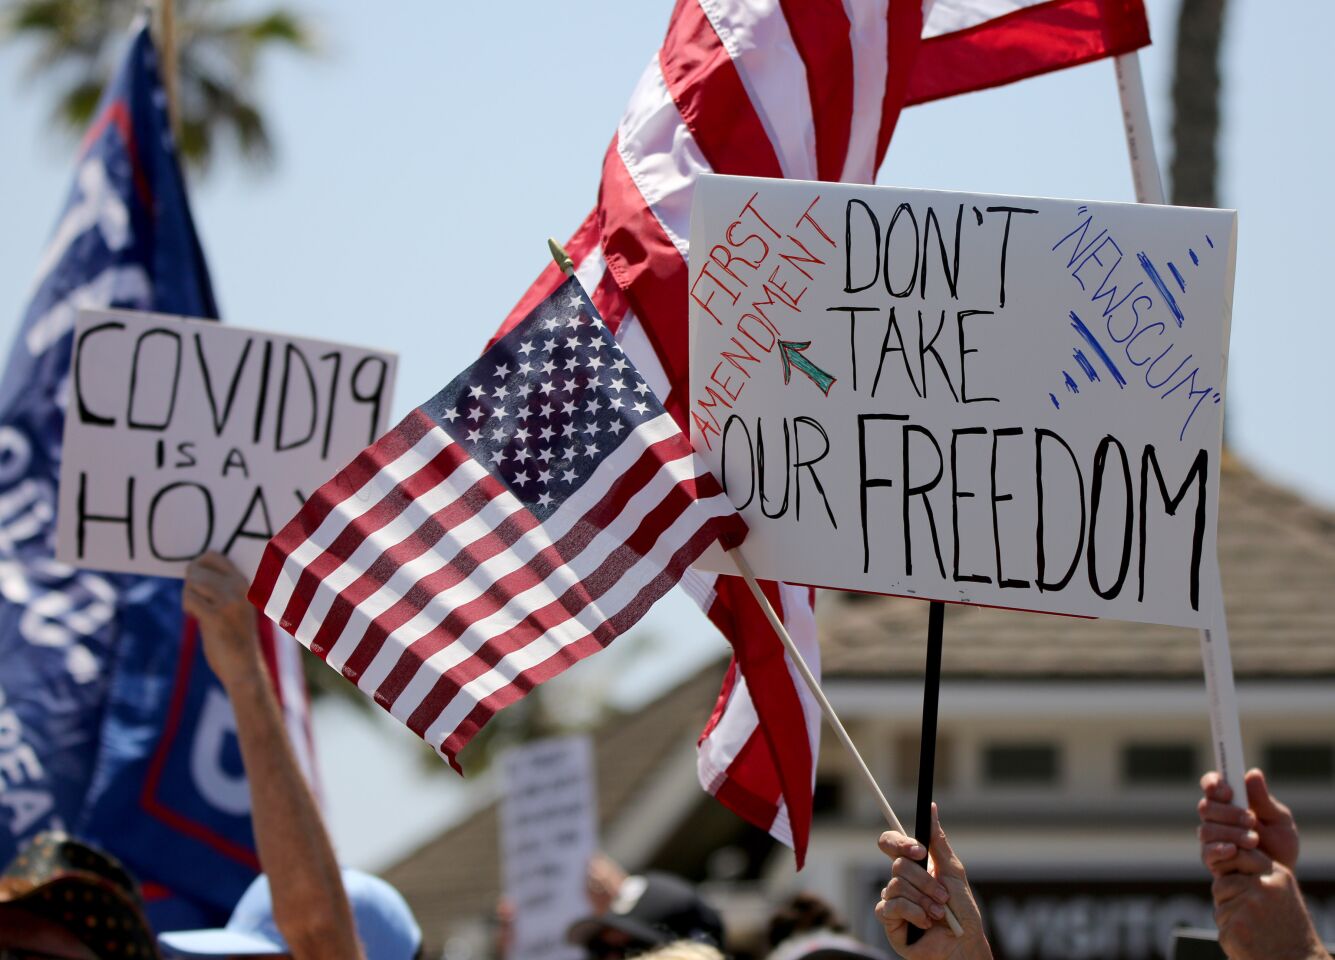 Protesters hold signs up during the protest in Huntington Beach on Friday.